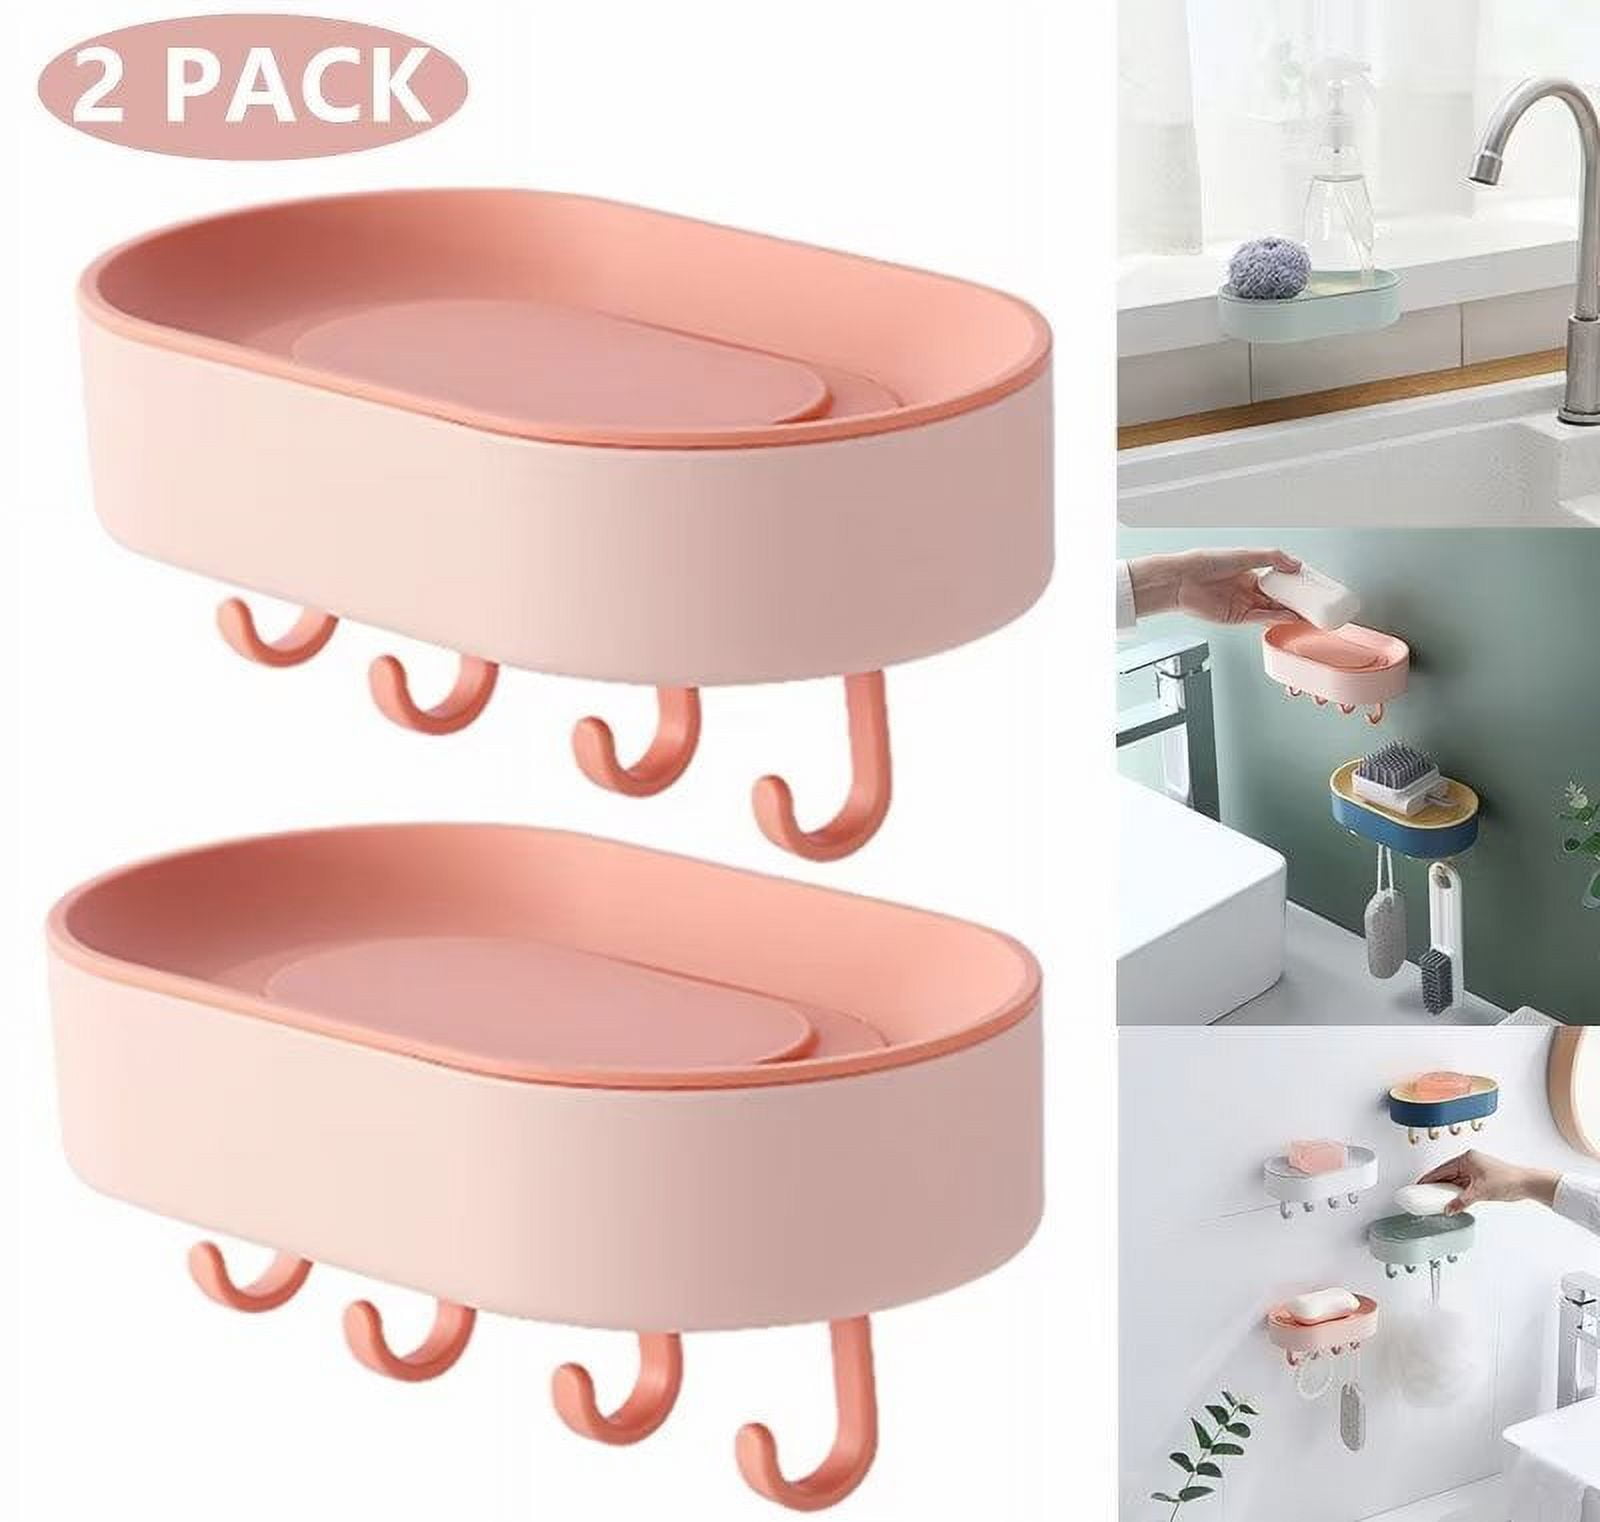 NICAVKIT 2 Pack Shower Soap Dish Holder with Lid, Bar Soap Holder with  Drain, Wall Mounted Soap Box Container for Shower, Bathroom, Bathtub,  Kitchen